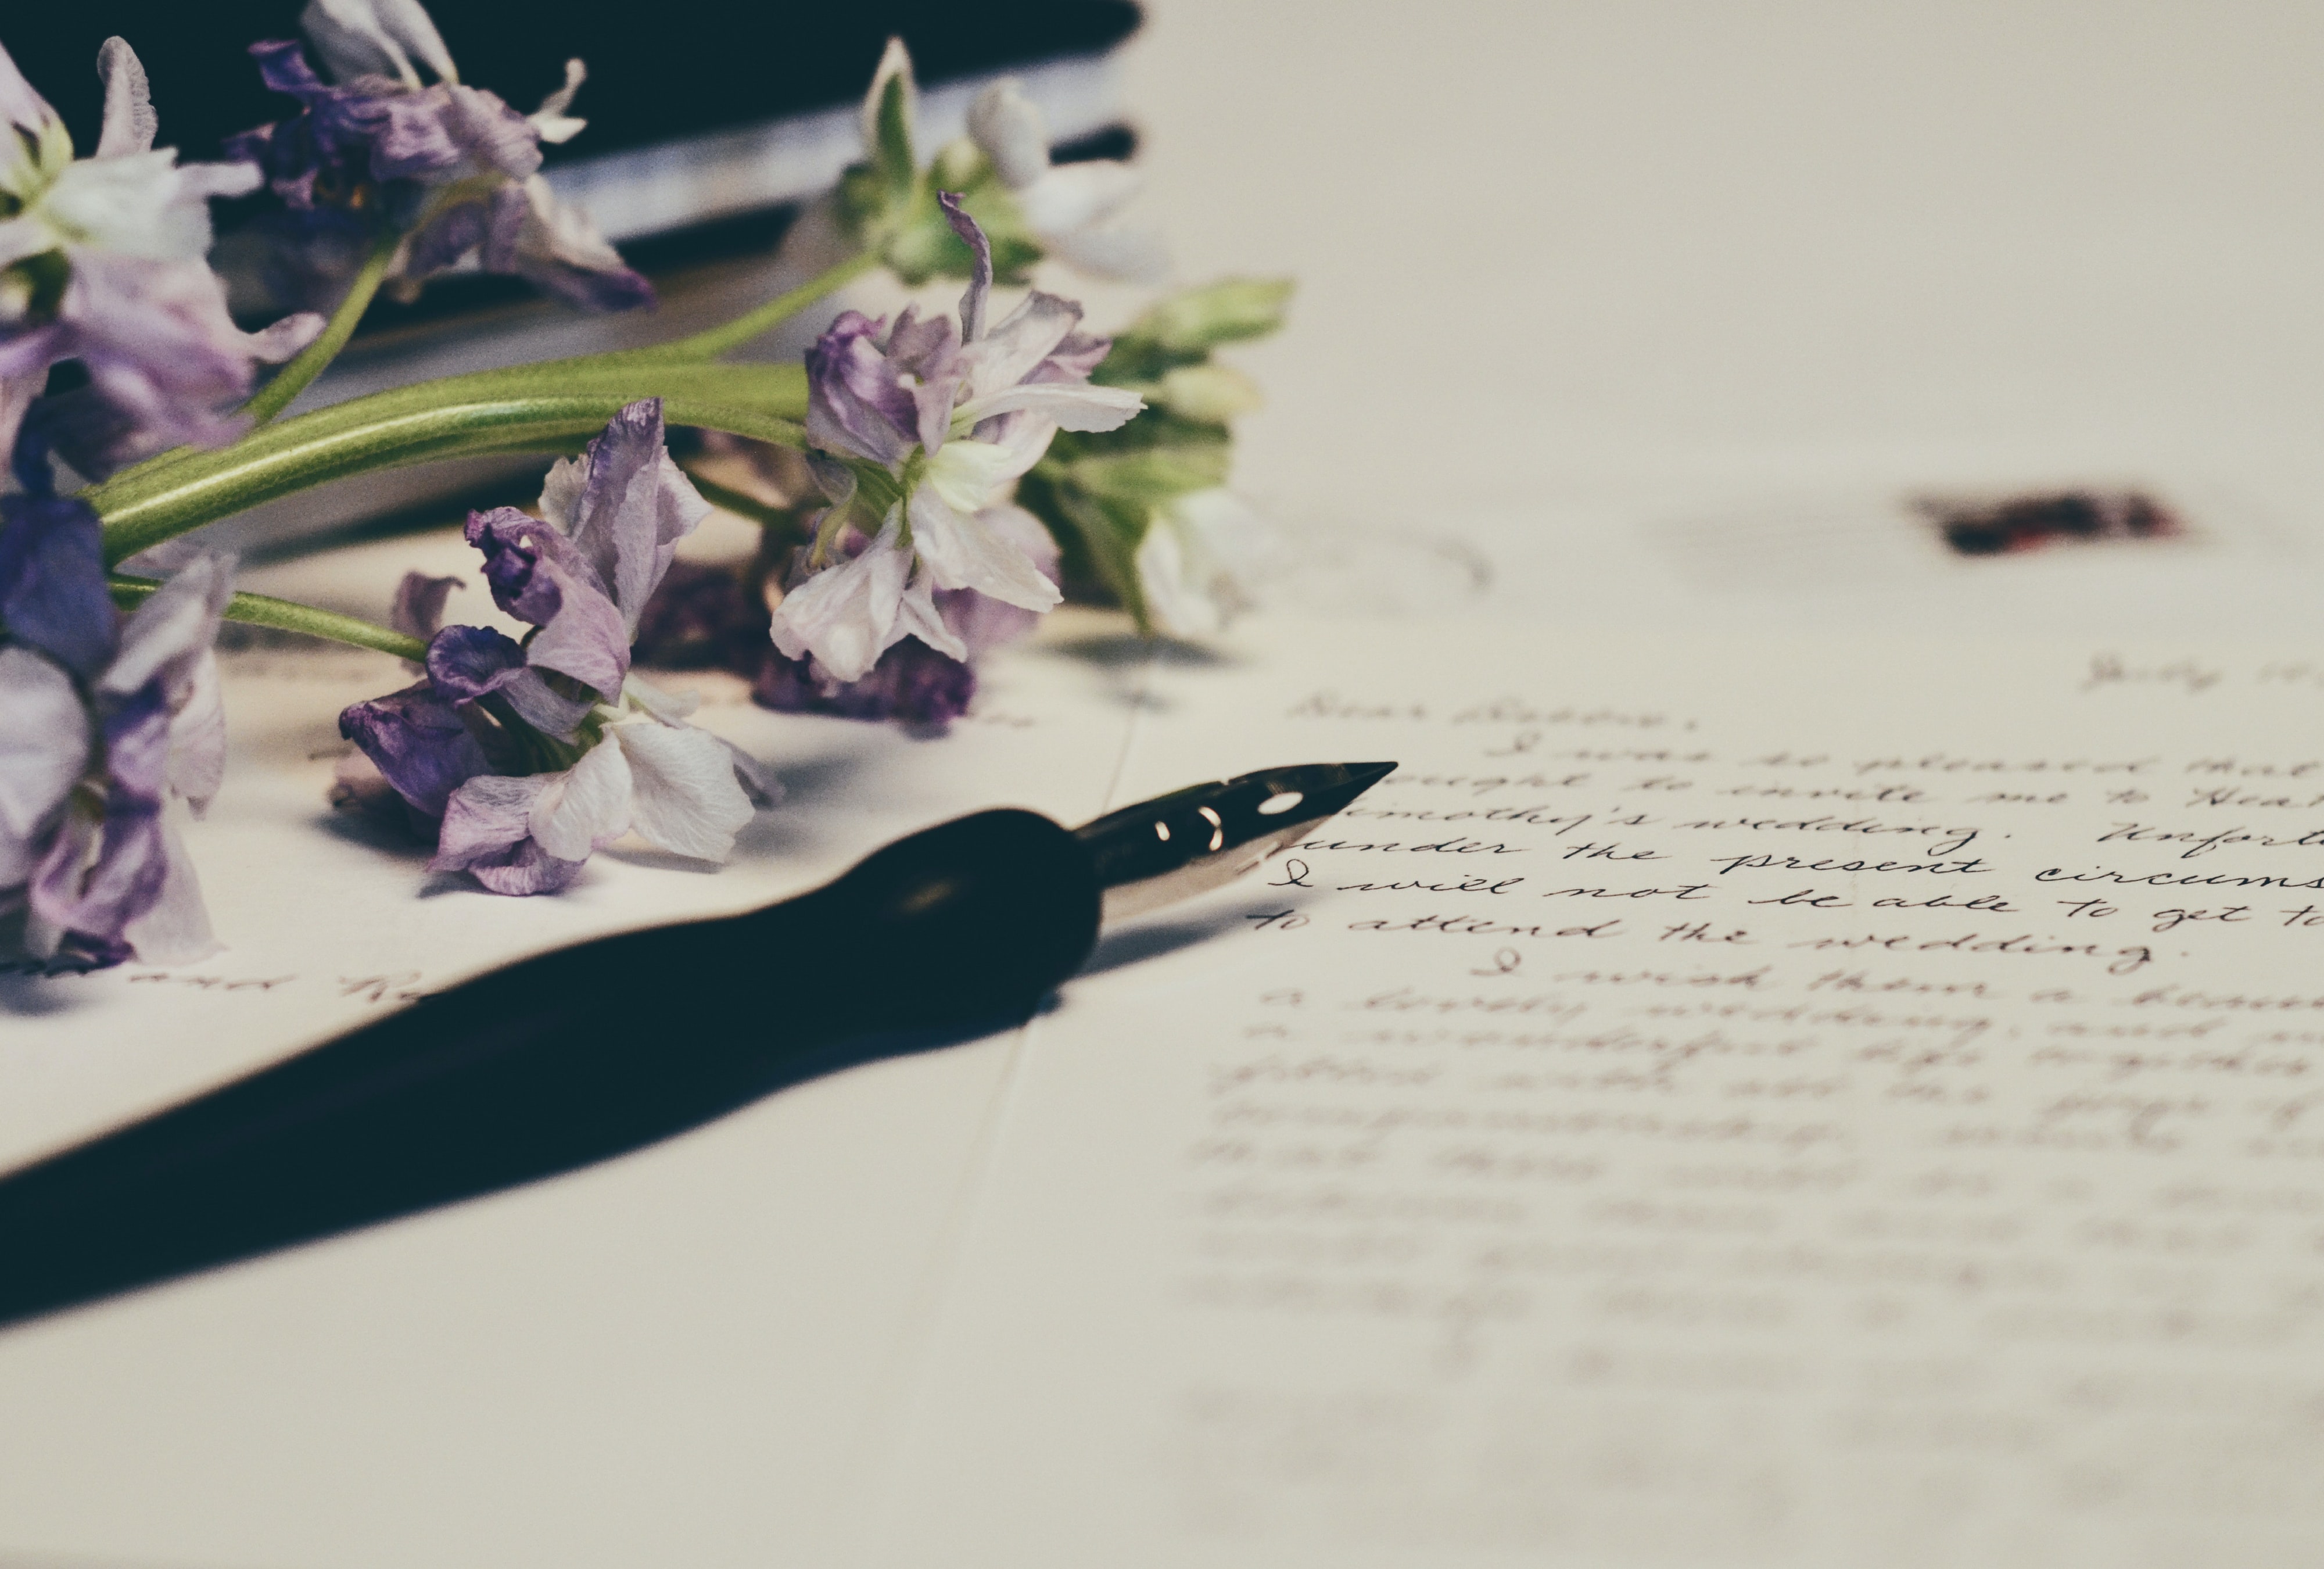 April is national poetry month. NWPB’s Lauren Gallup interviewed Tacoma’s poet laureate on the art form, and its lasting influence. Photo by Debby Hudson via Unsplash